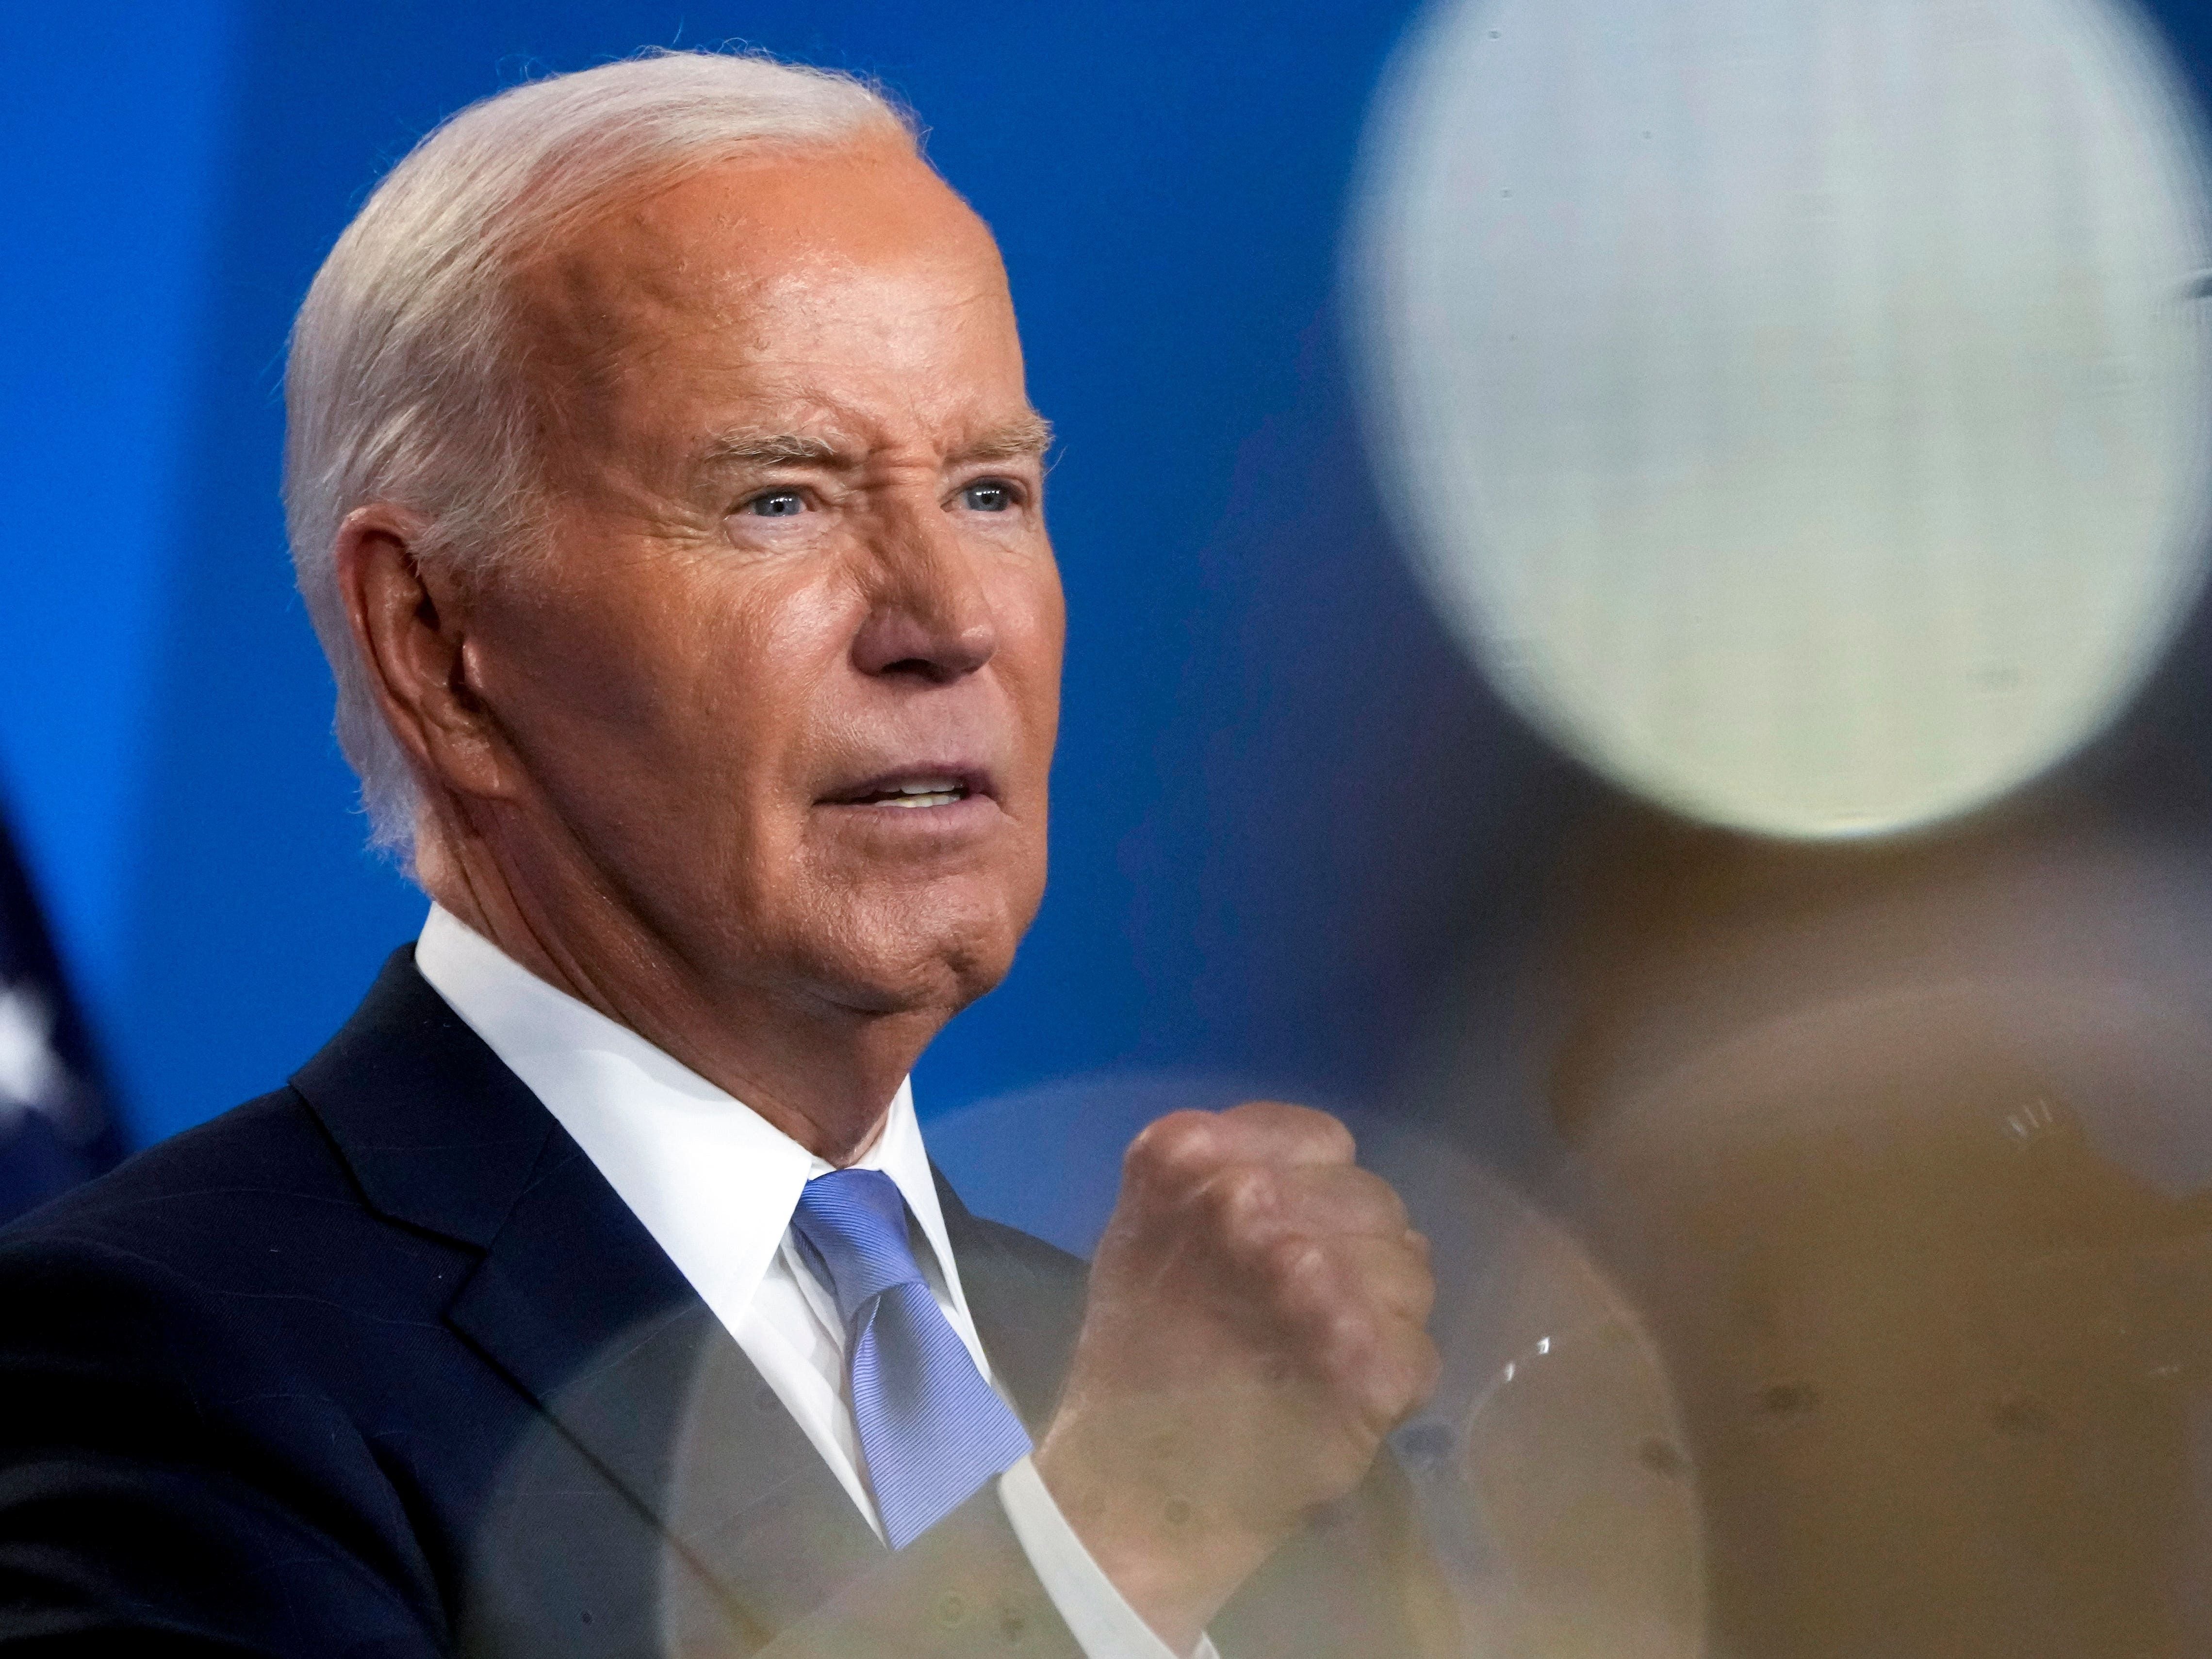 Biden’s ability to win back Democrats tested at perilous moment for campaign